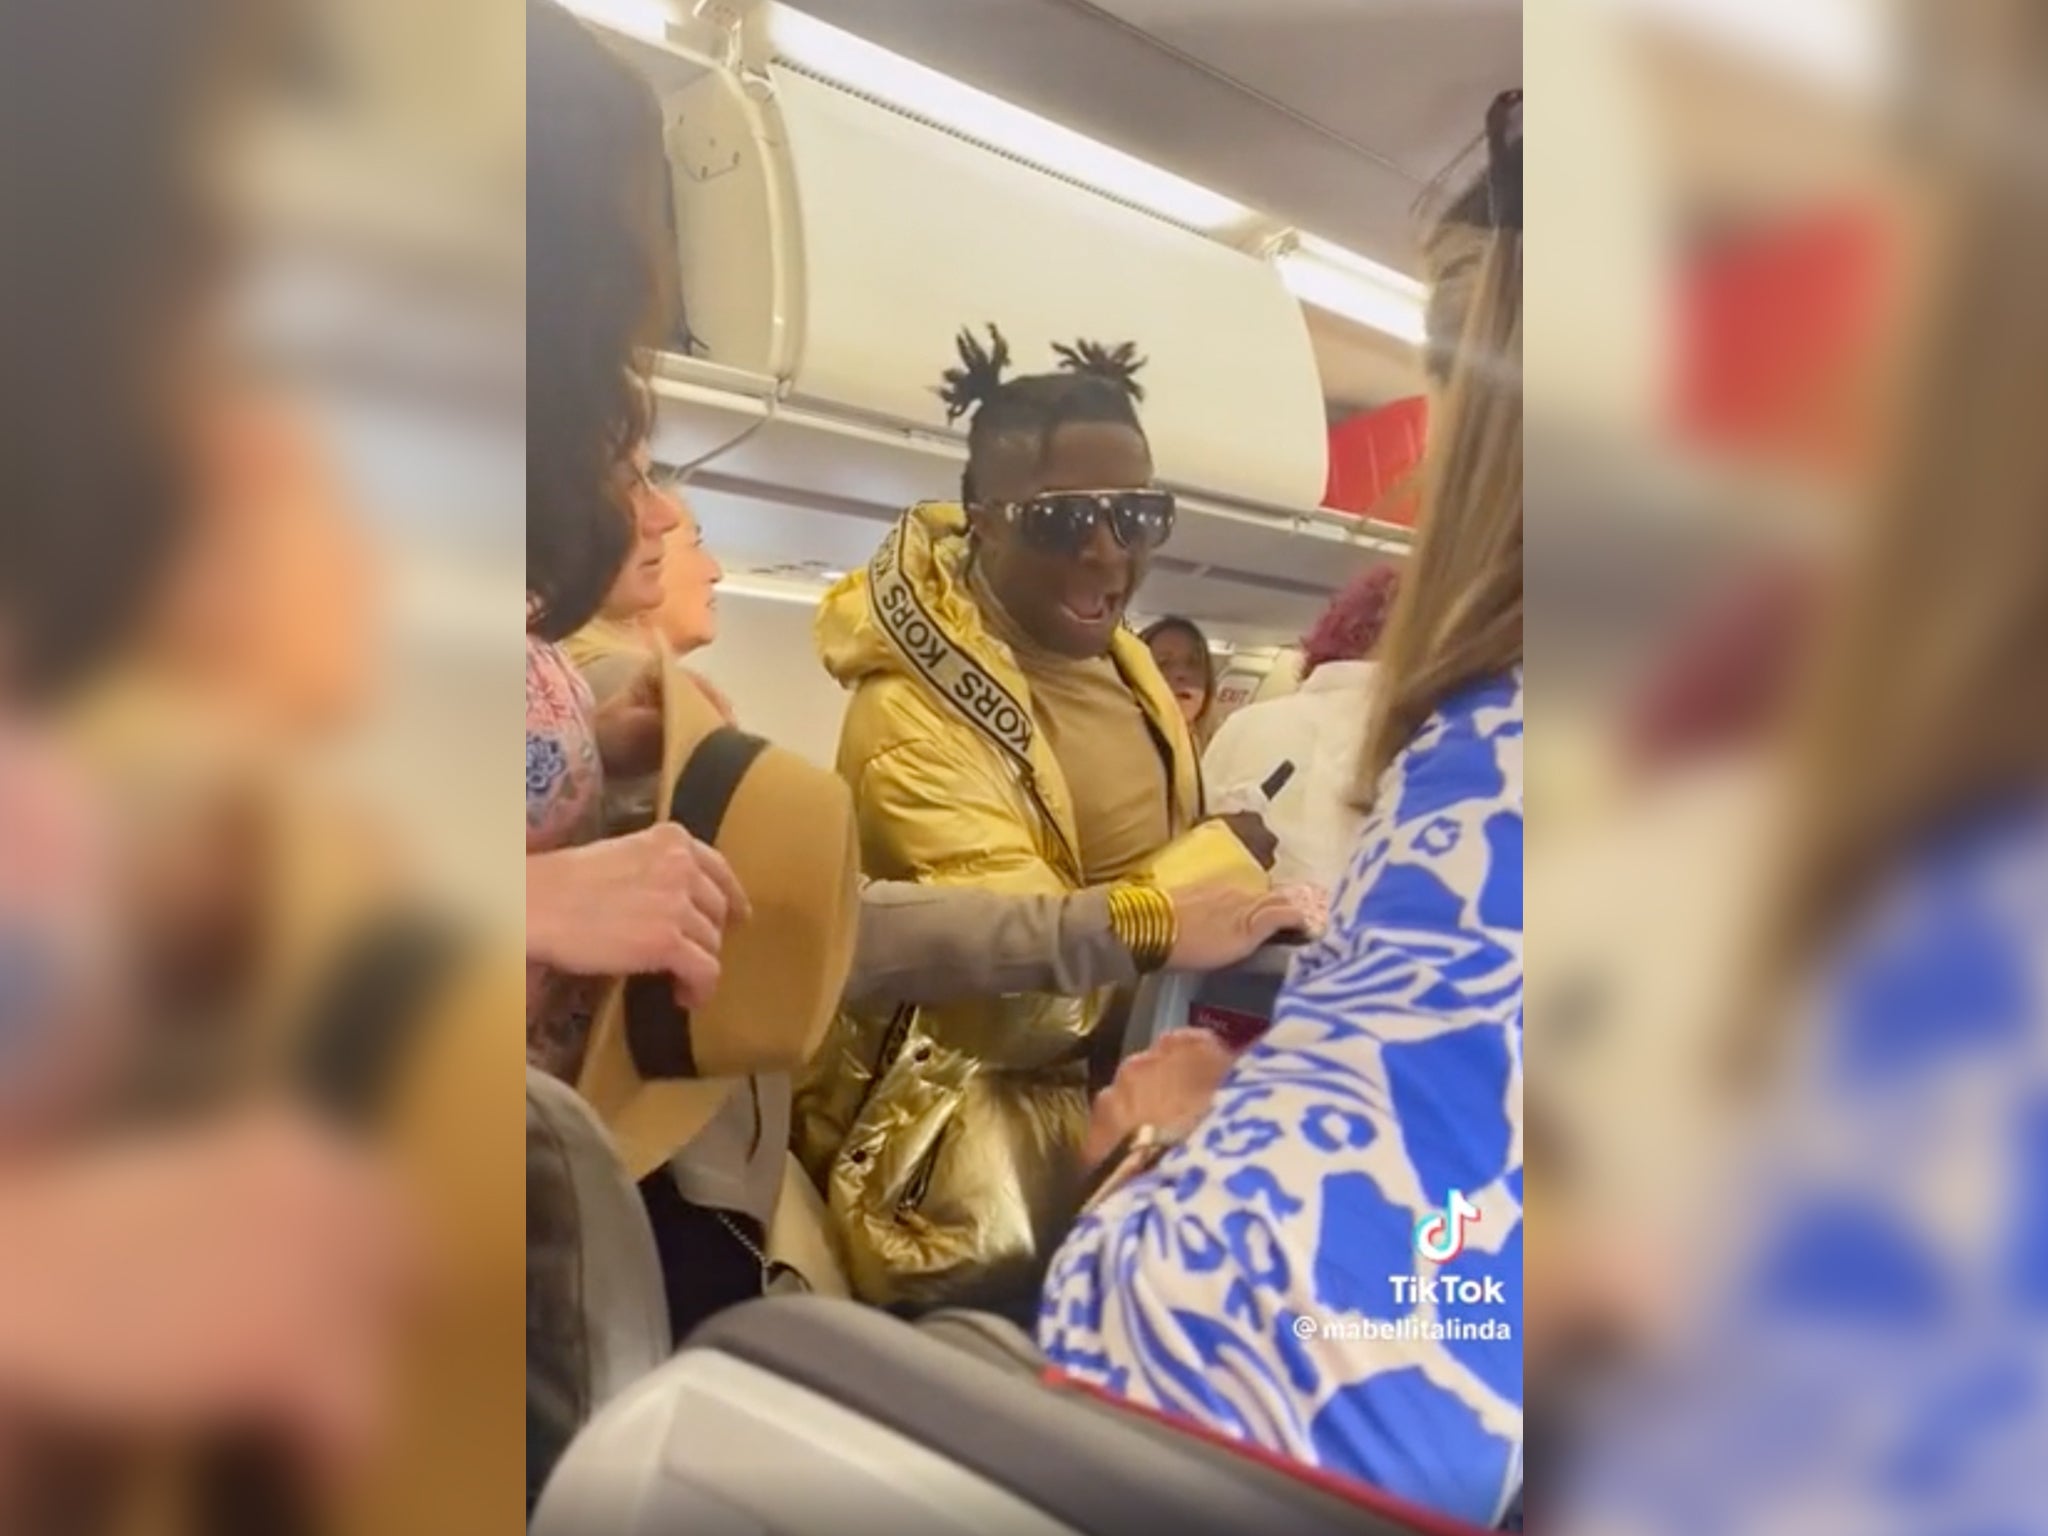 In a since-deleted video, the traveller is seen forcing his way past fellow passengers